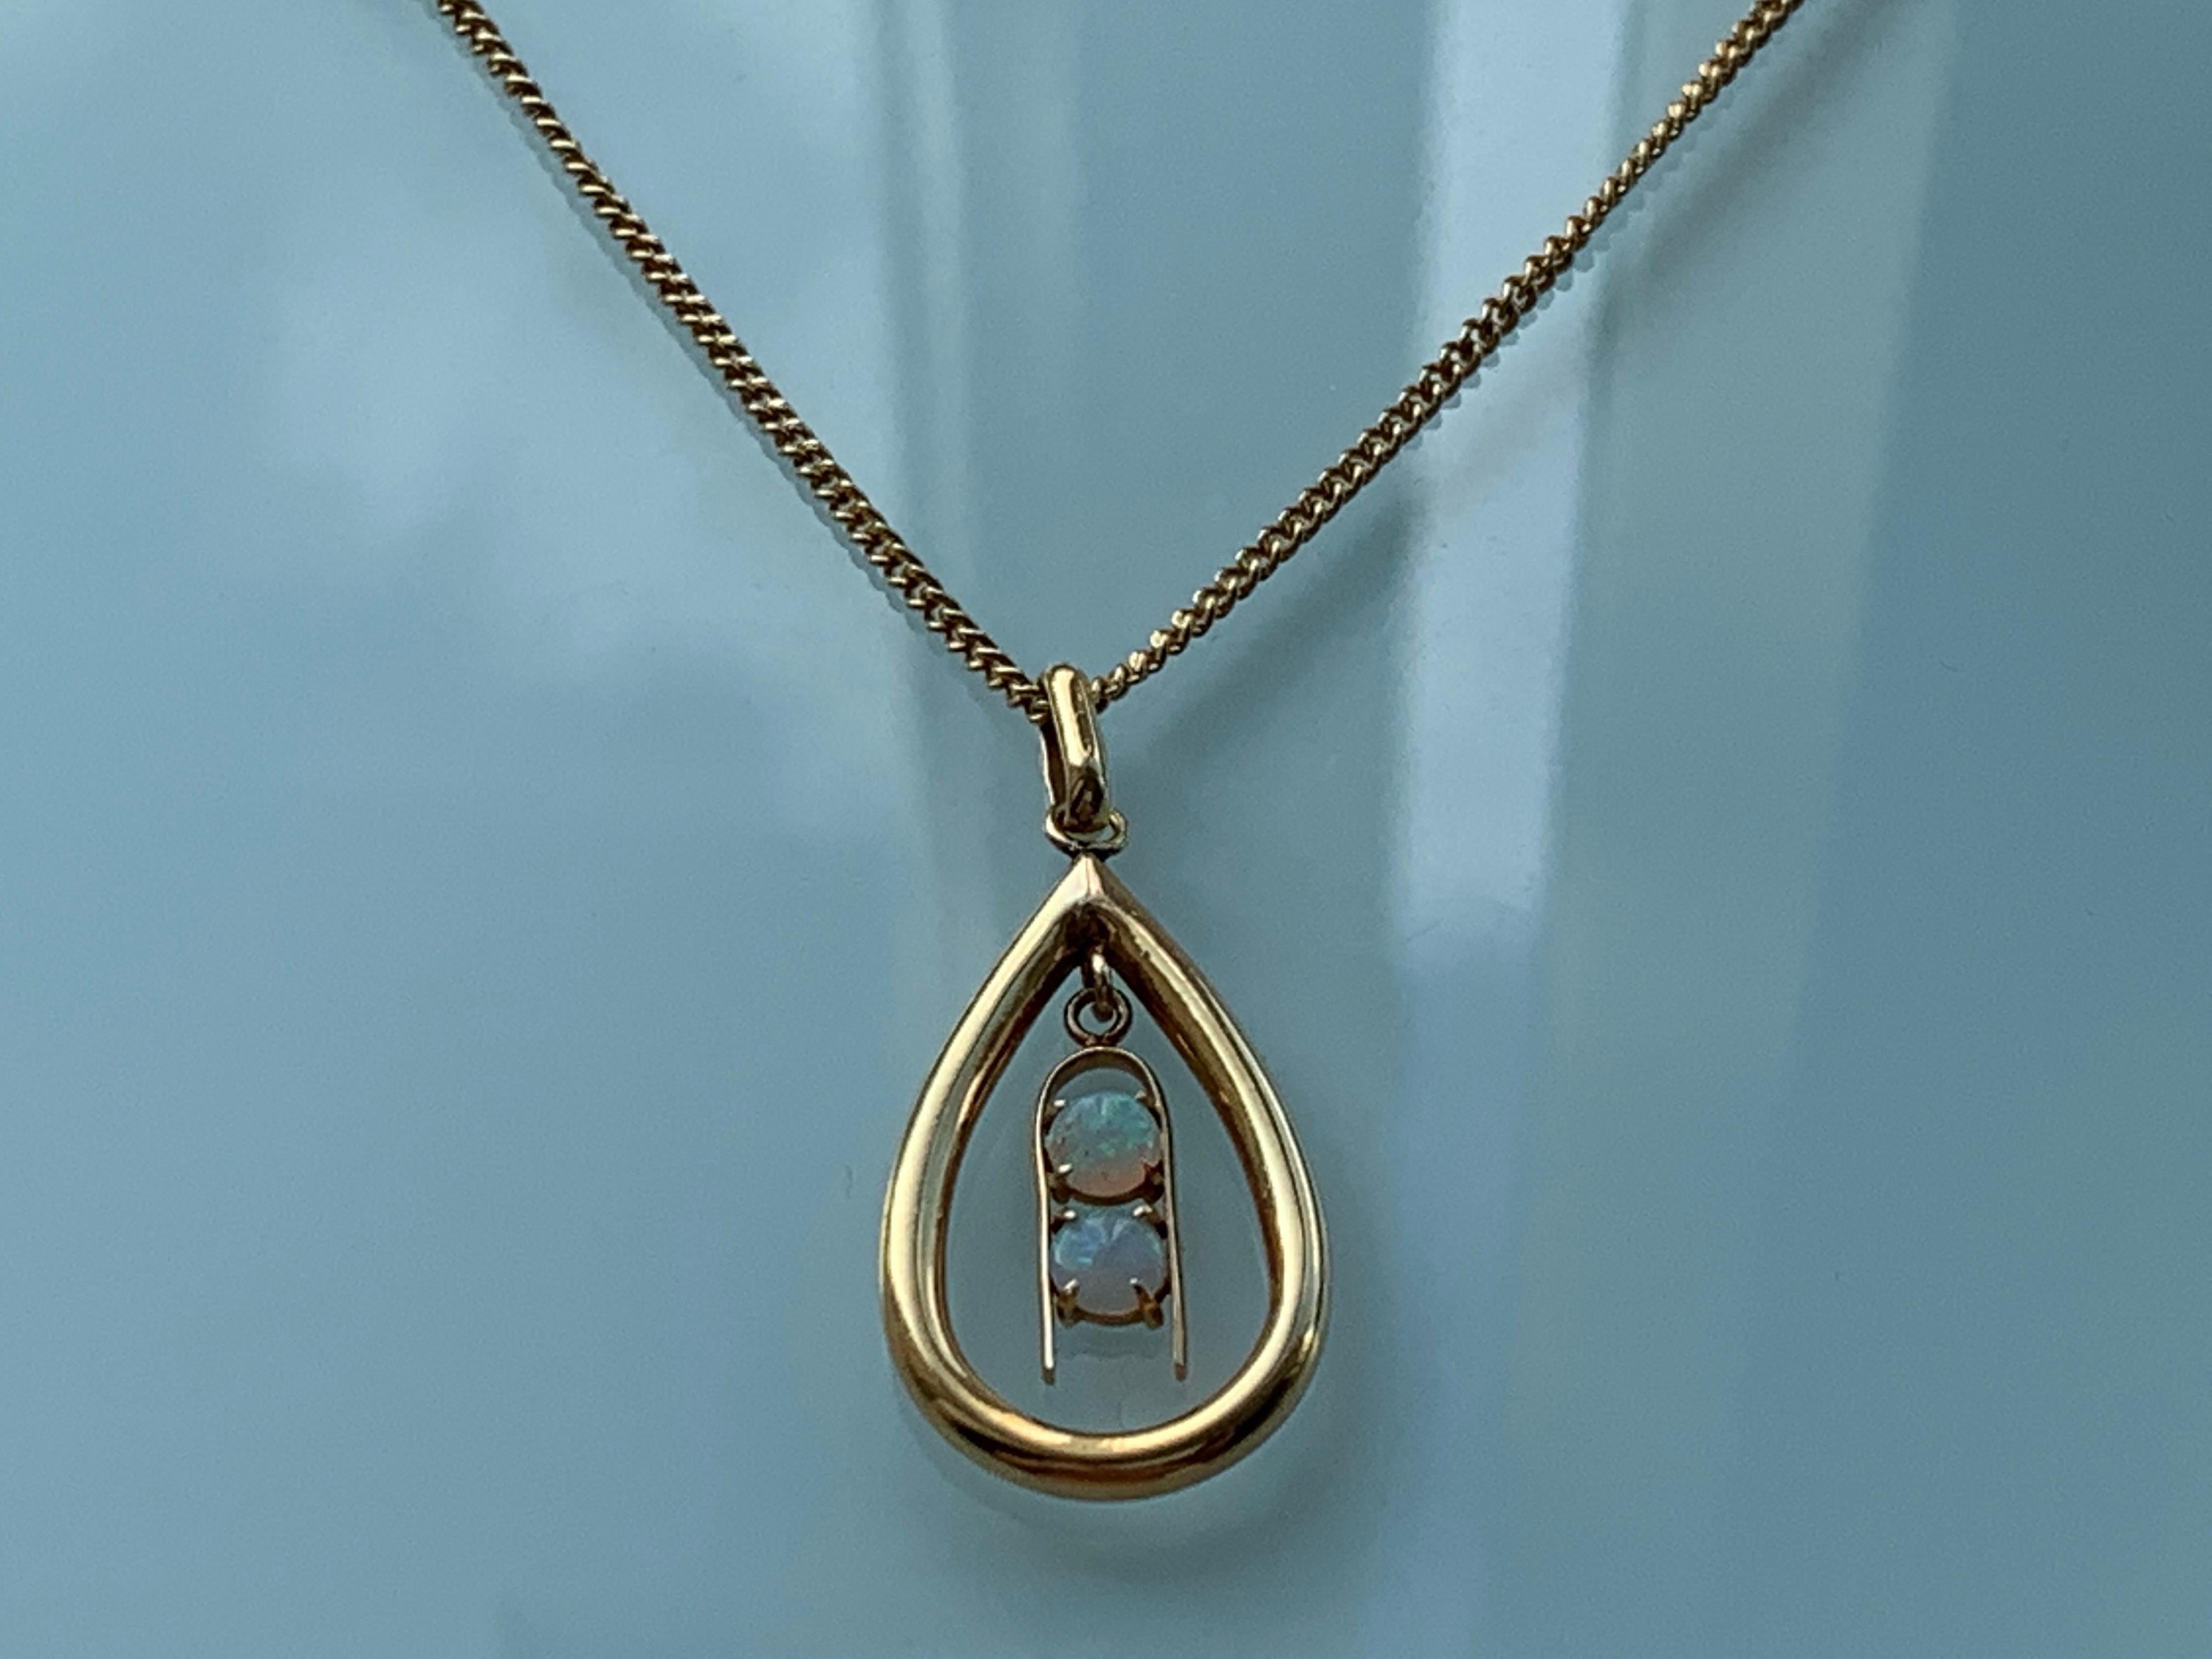 18ct Gold Opal Pendant
with Matching 18ct Gold Chain .
Rare Vintage Design with timeless appeal 
Pear Shaped Pendant has a swinging central section which is holding two Natural Opals
Stamped 18k on bail
Flag symbol and 750 on one side of chains